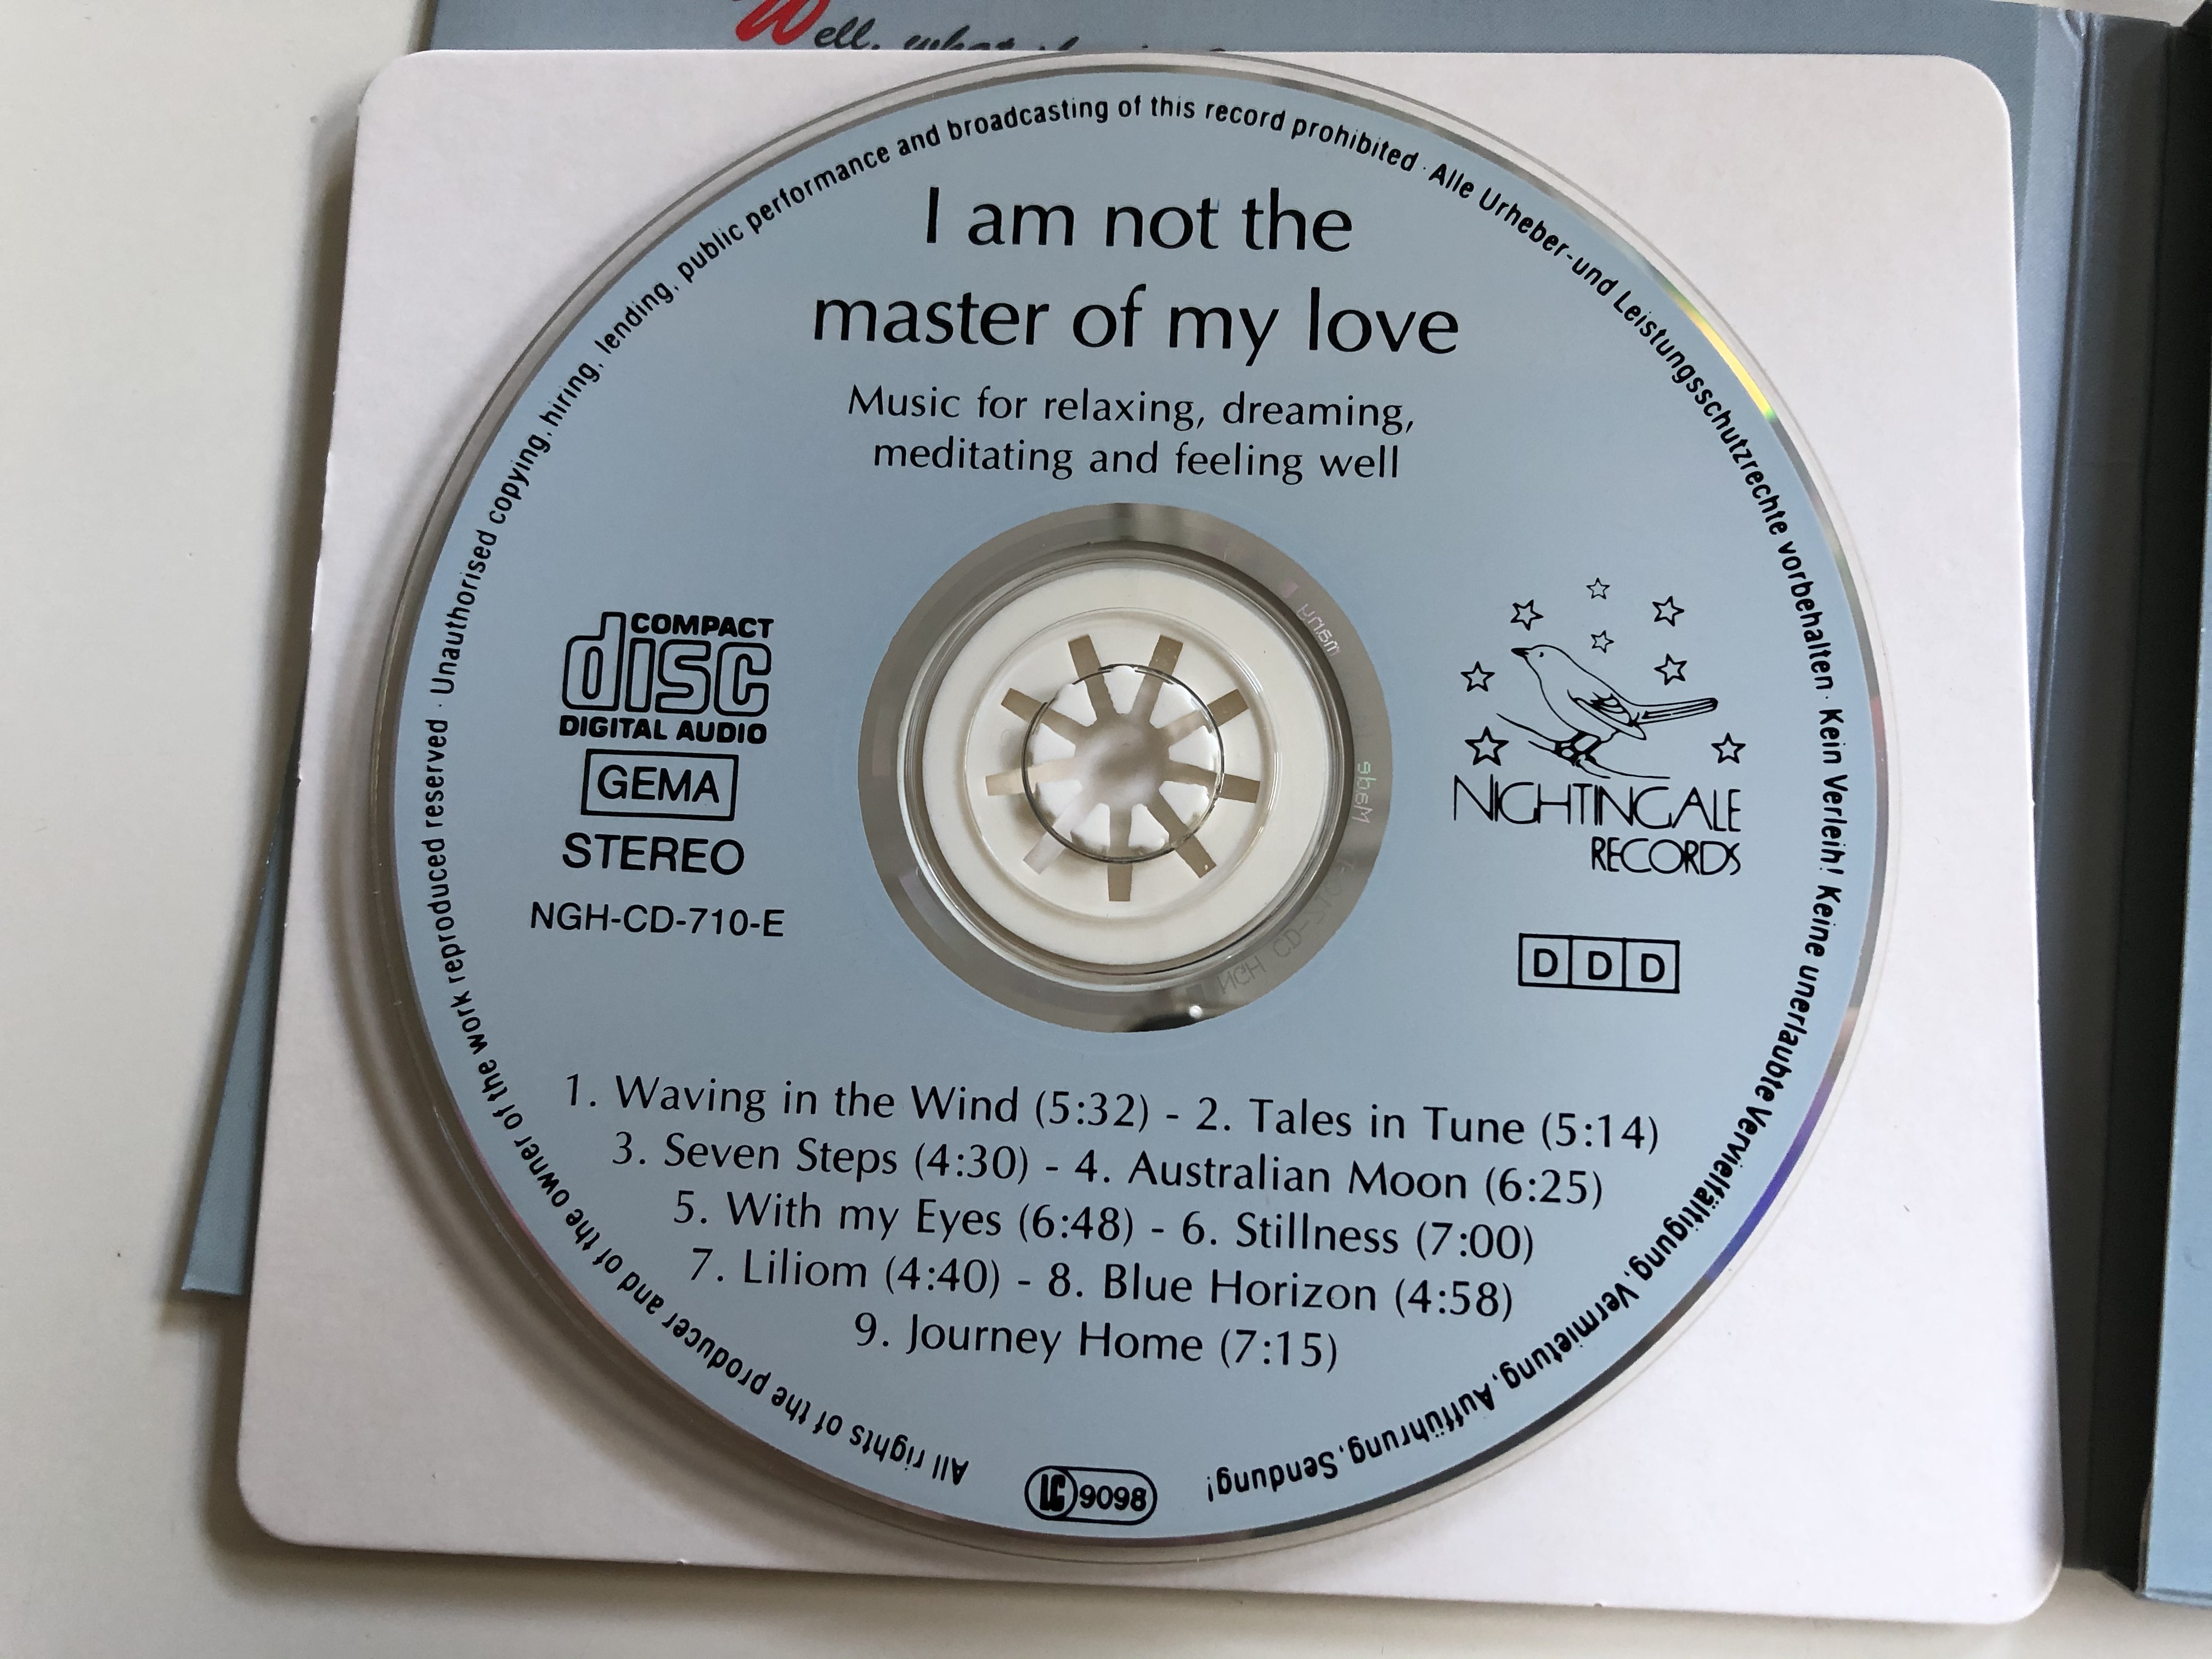 music-for-contemplative-moments-i-am-not-the-master-of-my-love-mona-lisa-edition-meistersinger-musik-audio-cd-stereo-ngh-cd-710-e-5-.jpg